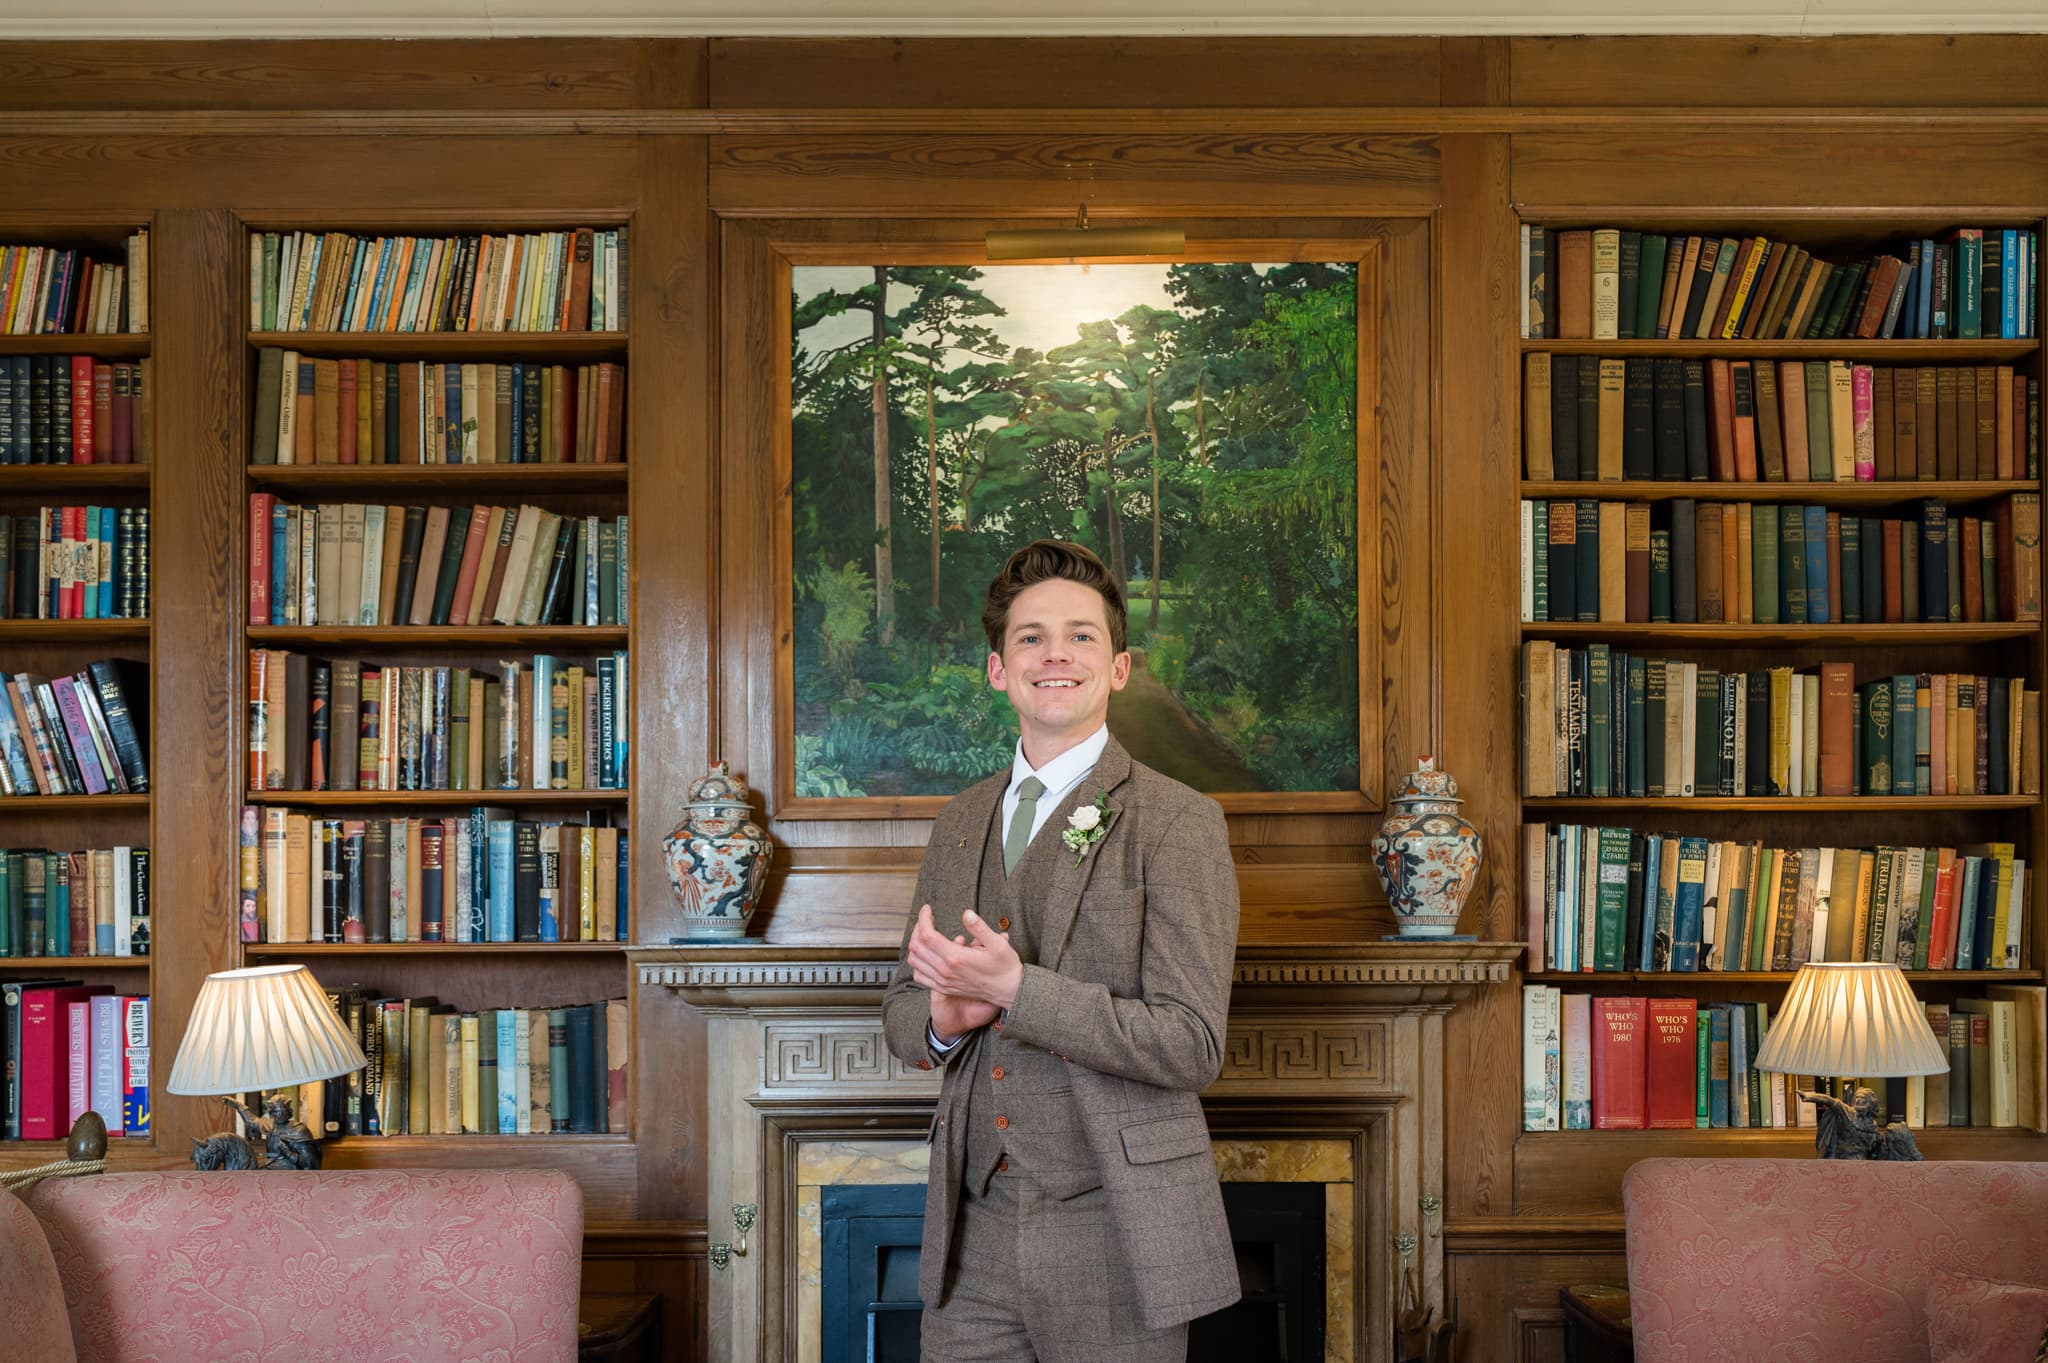 Portrait of the groom in front of a fireplace and bookshelves